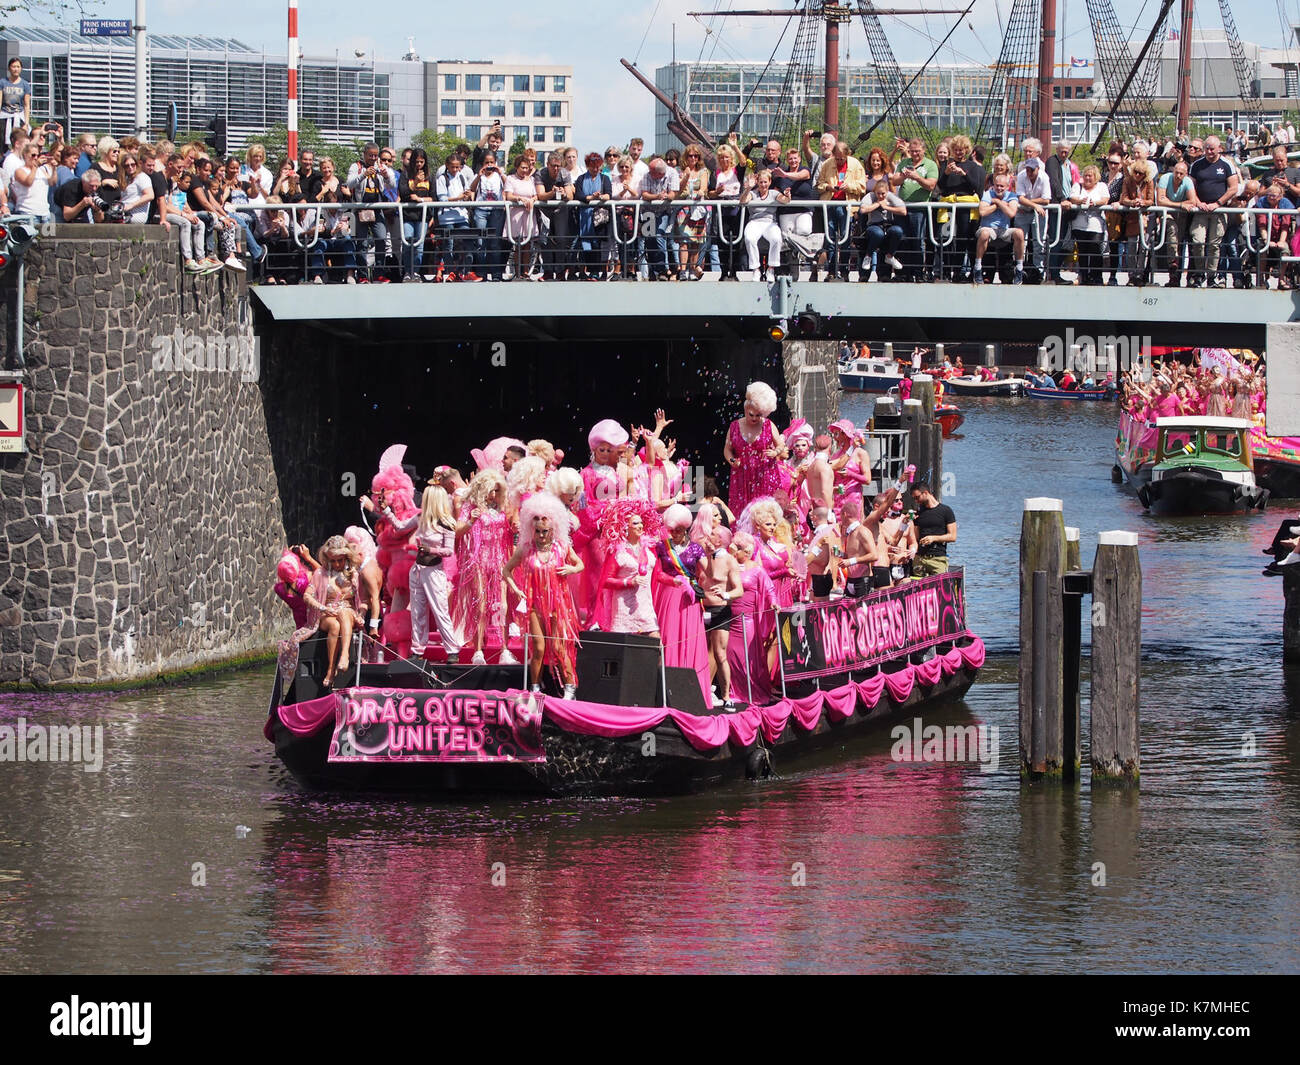 Boat 21 Drag Queens United, Canal Parade Amsterdam 2017 foto 4